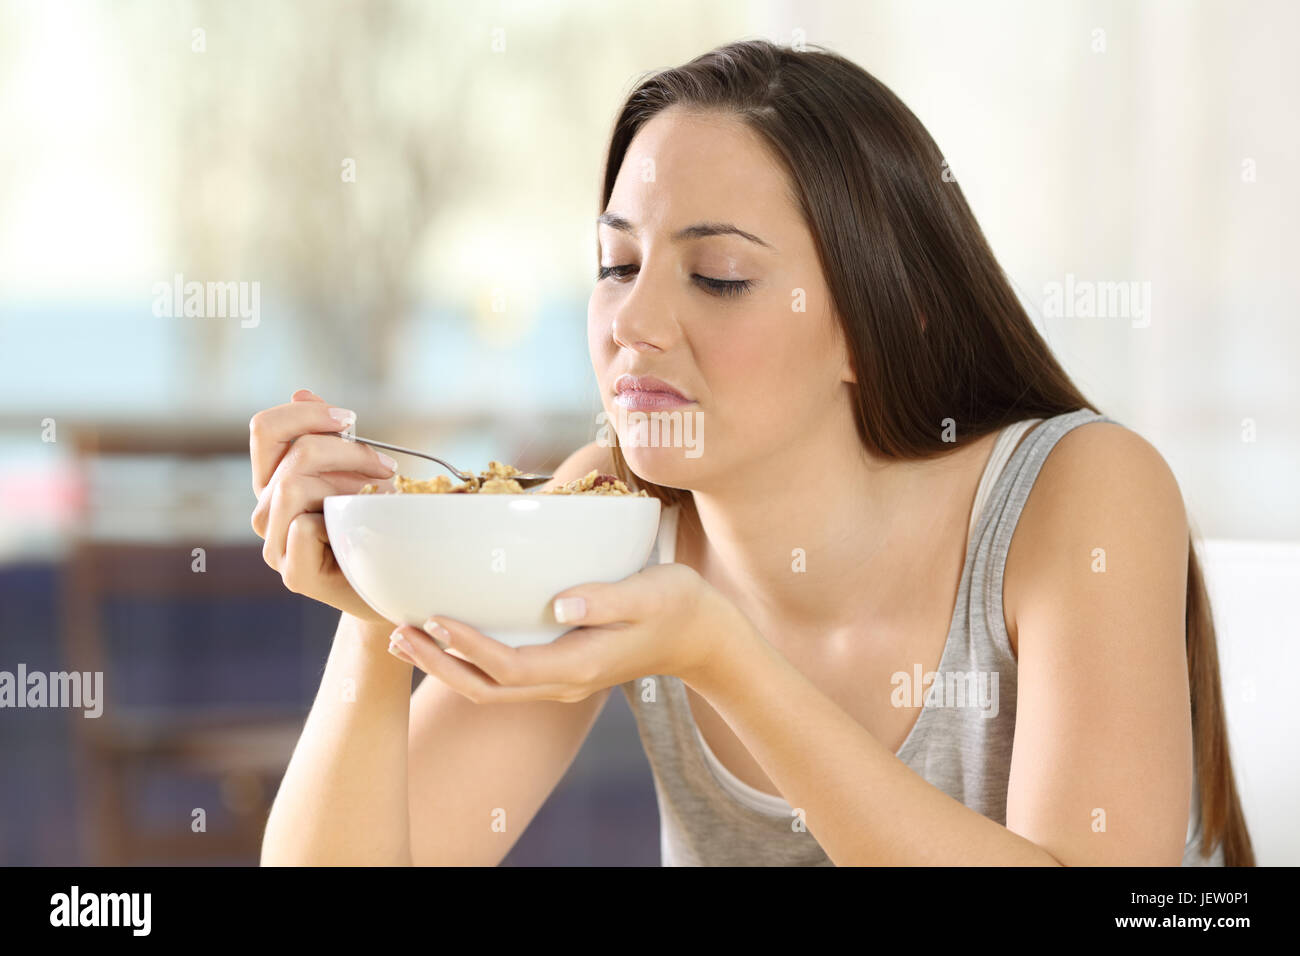 Disgusted woman eating cereals with bad taste at home Stock Photo